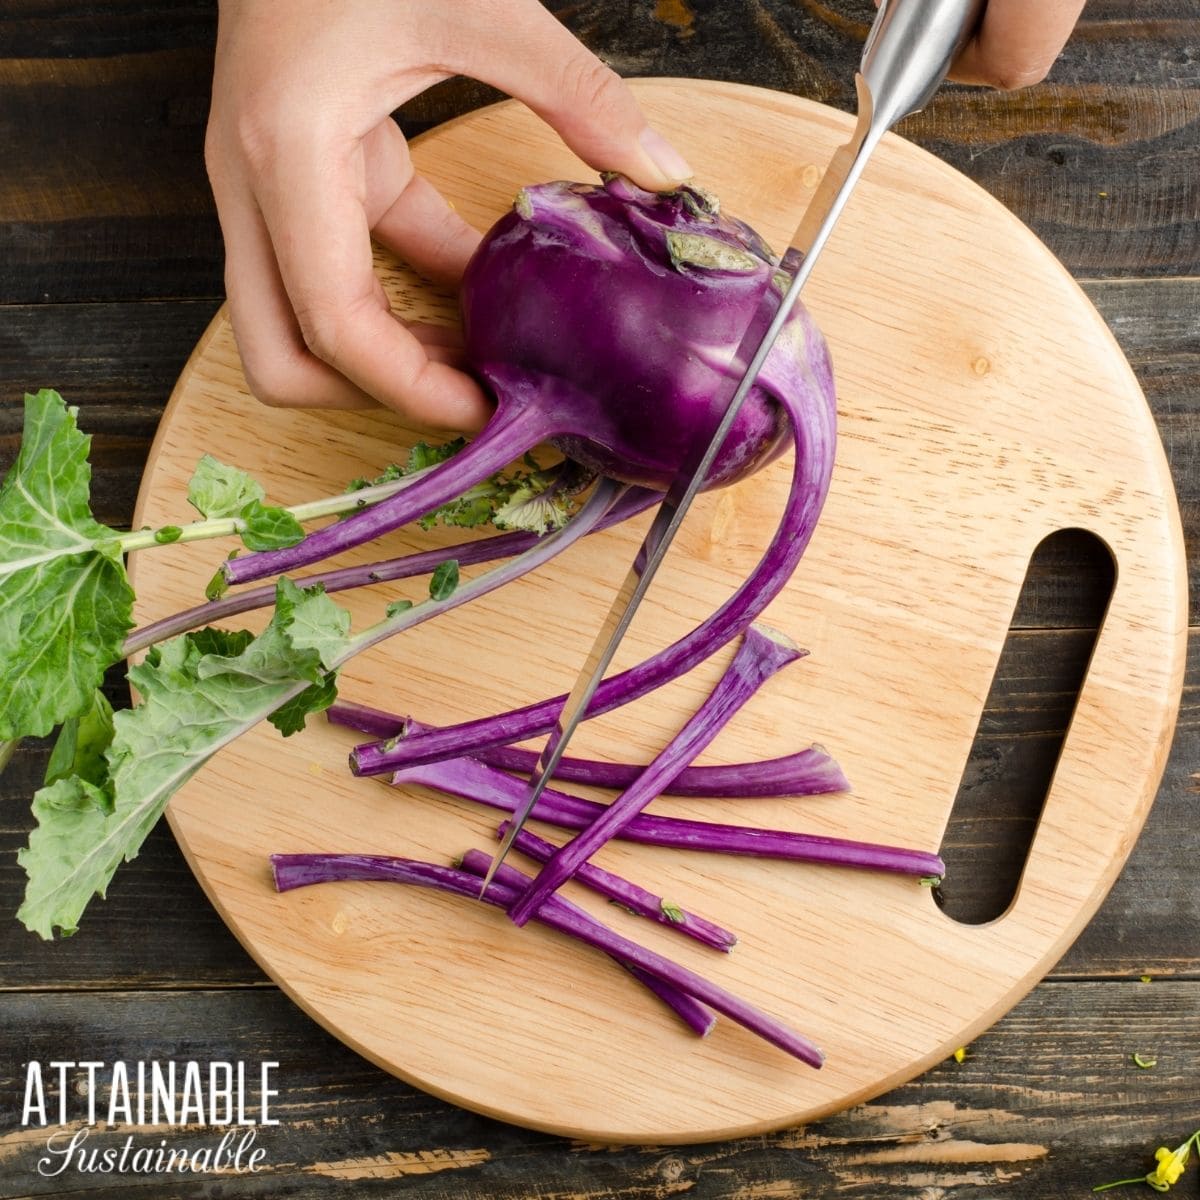 Purple kohlrabi being cut with a knife on a wooden cutting board. 